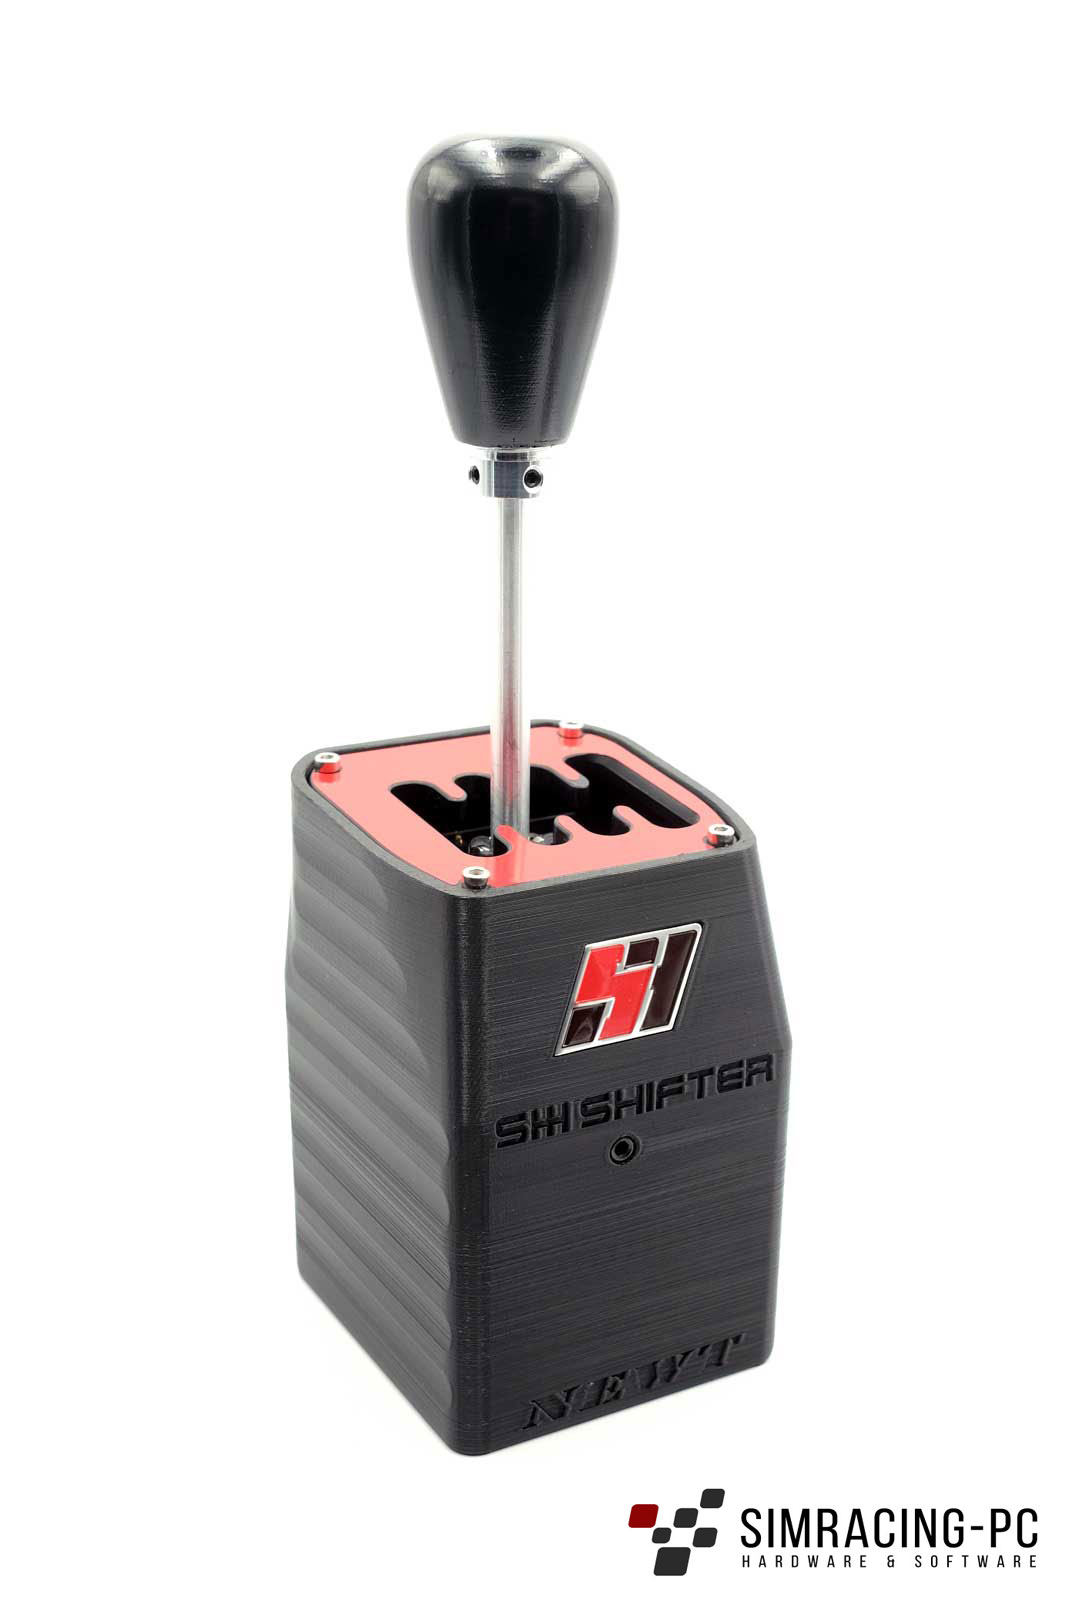 Cheap shifters short Review – SHH and H7R shifter from China